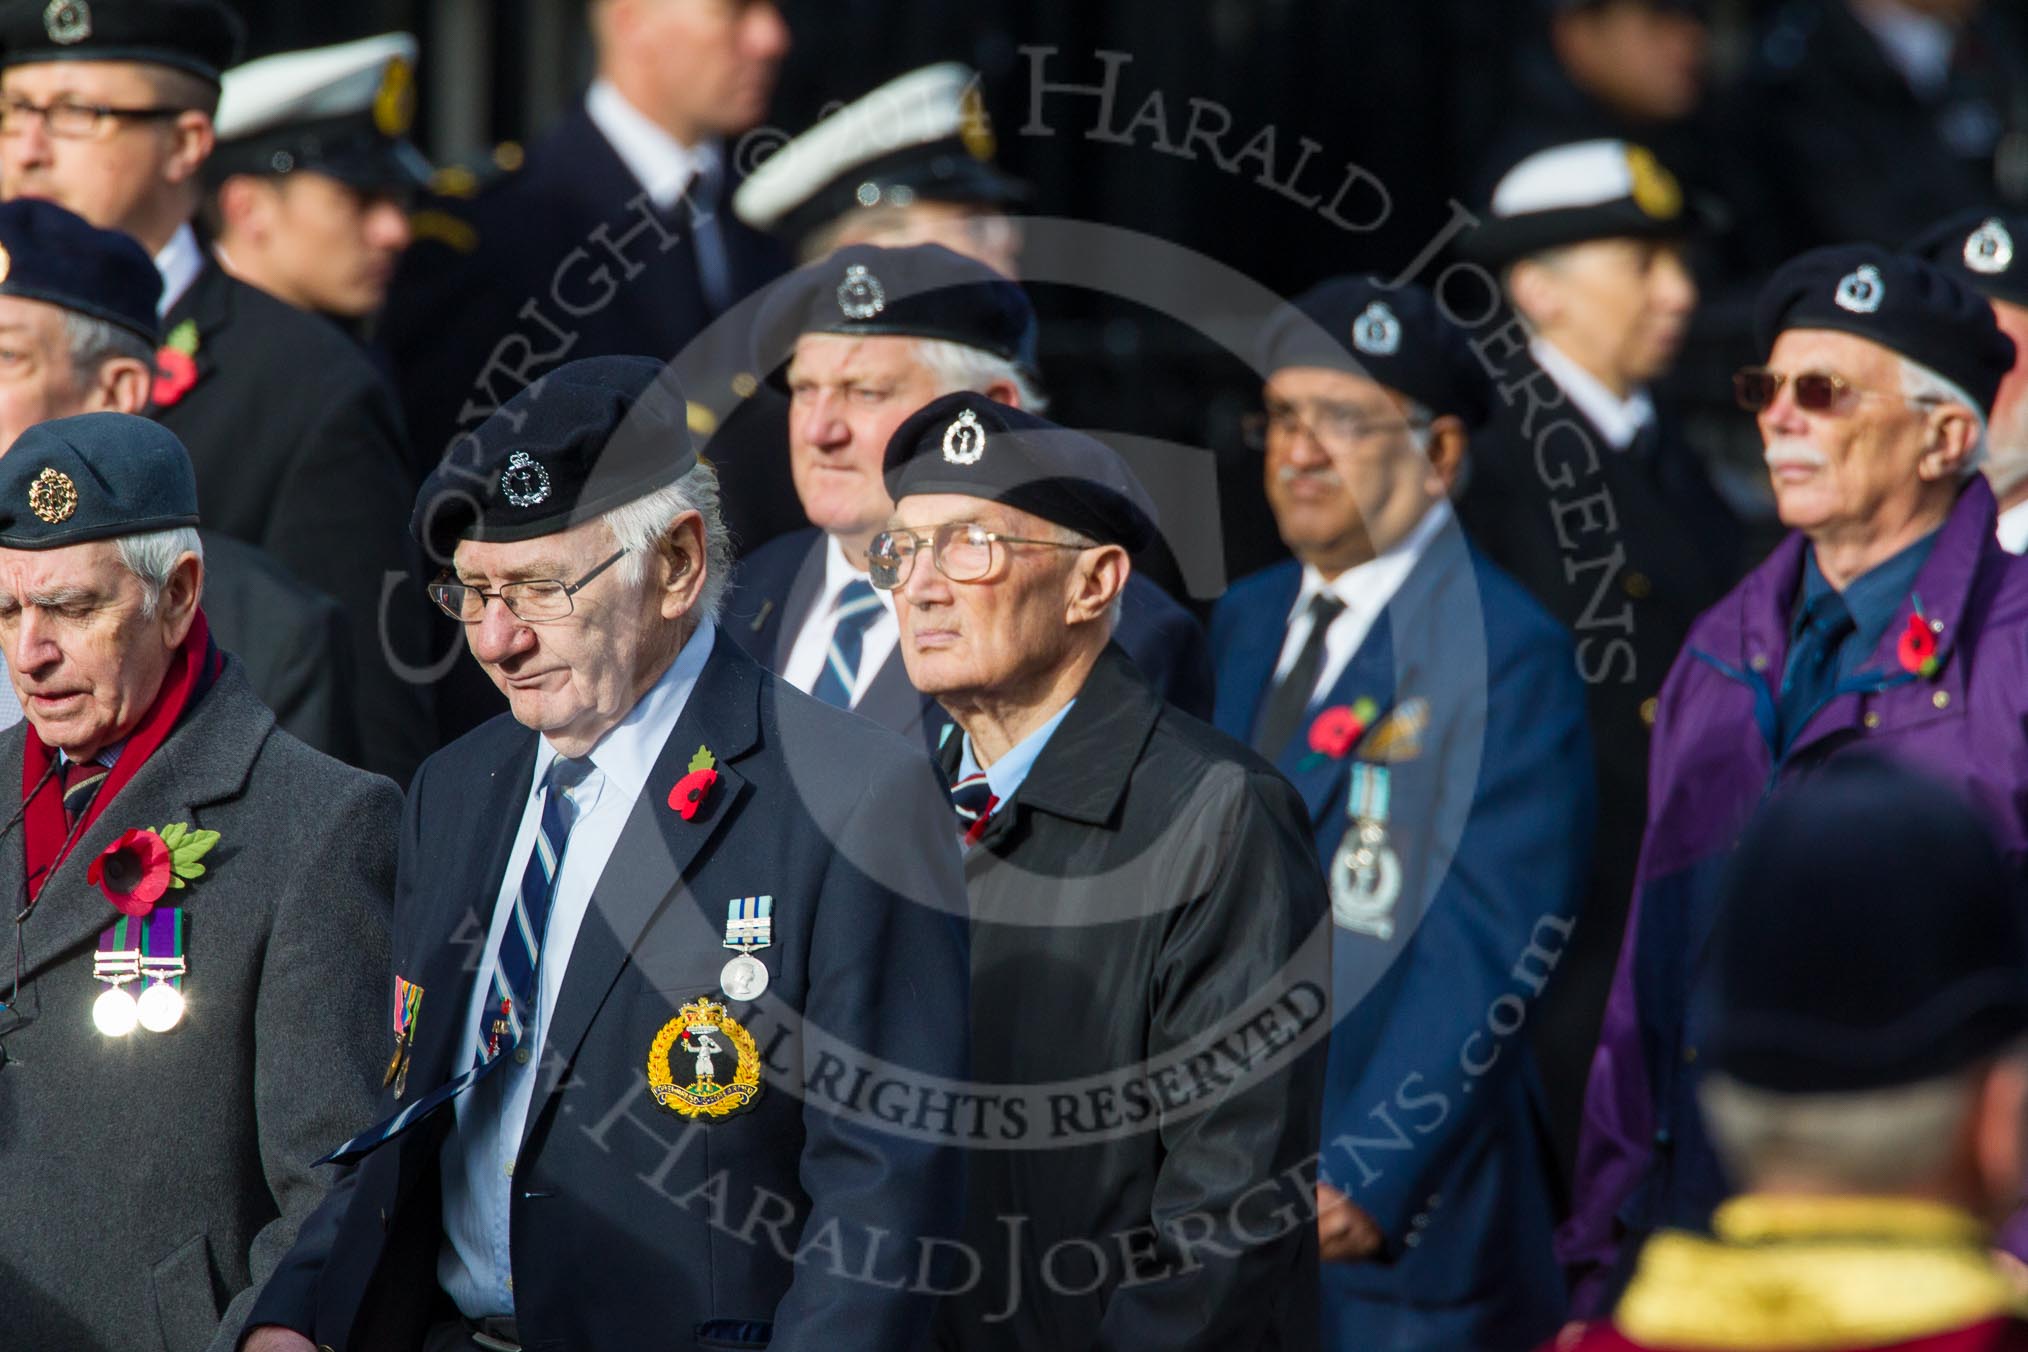 Remembrance Sunday at the Cenotaph in London 2014: Group C4 - Royal Observer Corps Association.
Press stand opposite the Foreign Office building, Whitehall, London SW1,
London,
Greater London,
United Kingdom,
on 09 November 2014 at 11:38, image #95